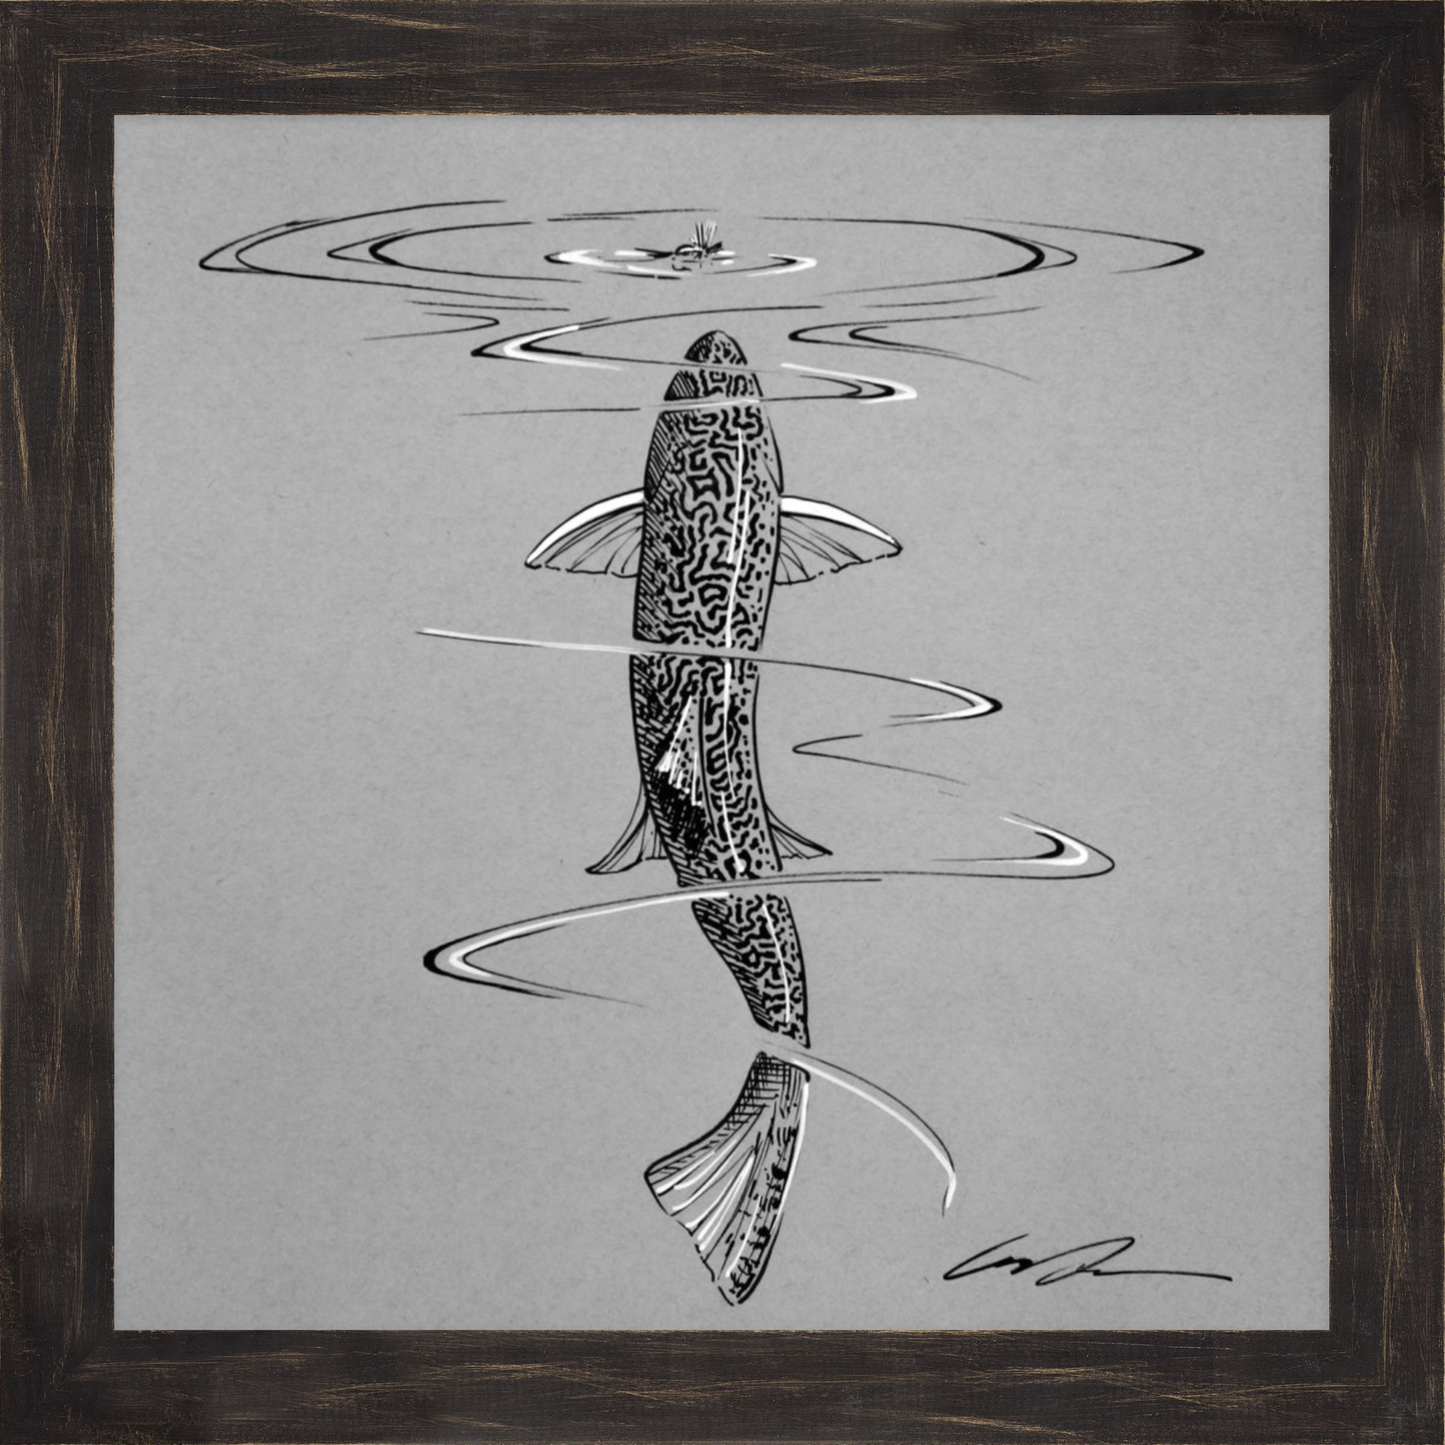 A pen and ink drawing of a brook trout rising to a fly, framed in a black rustic frame